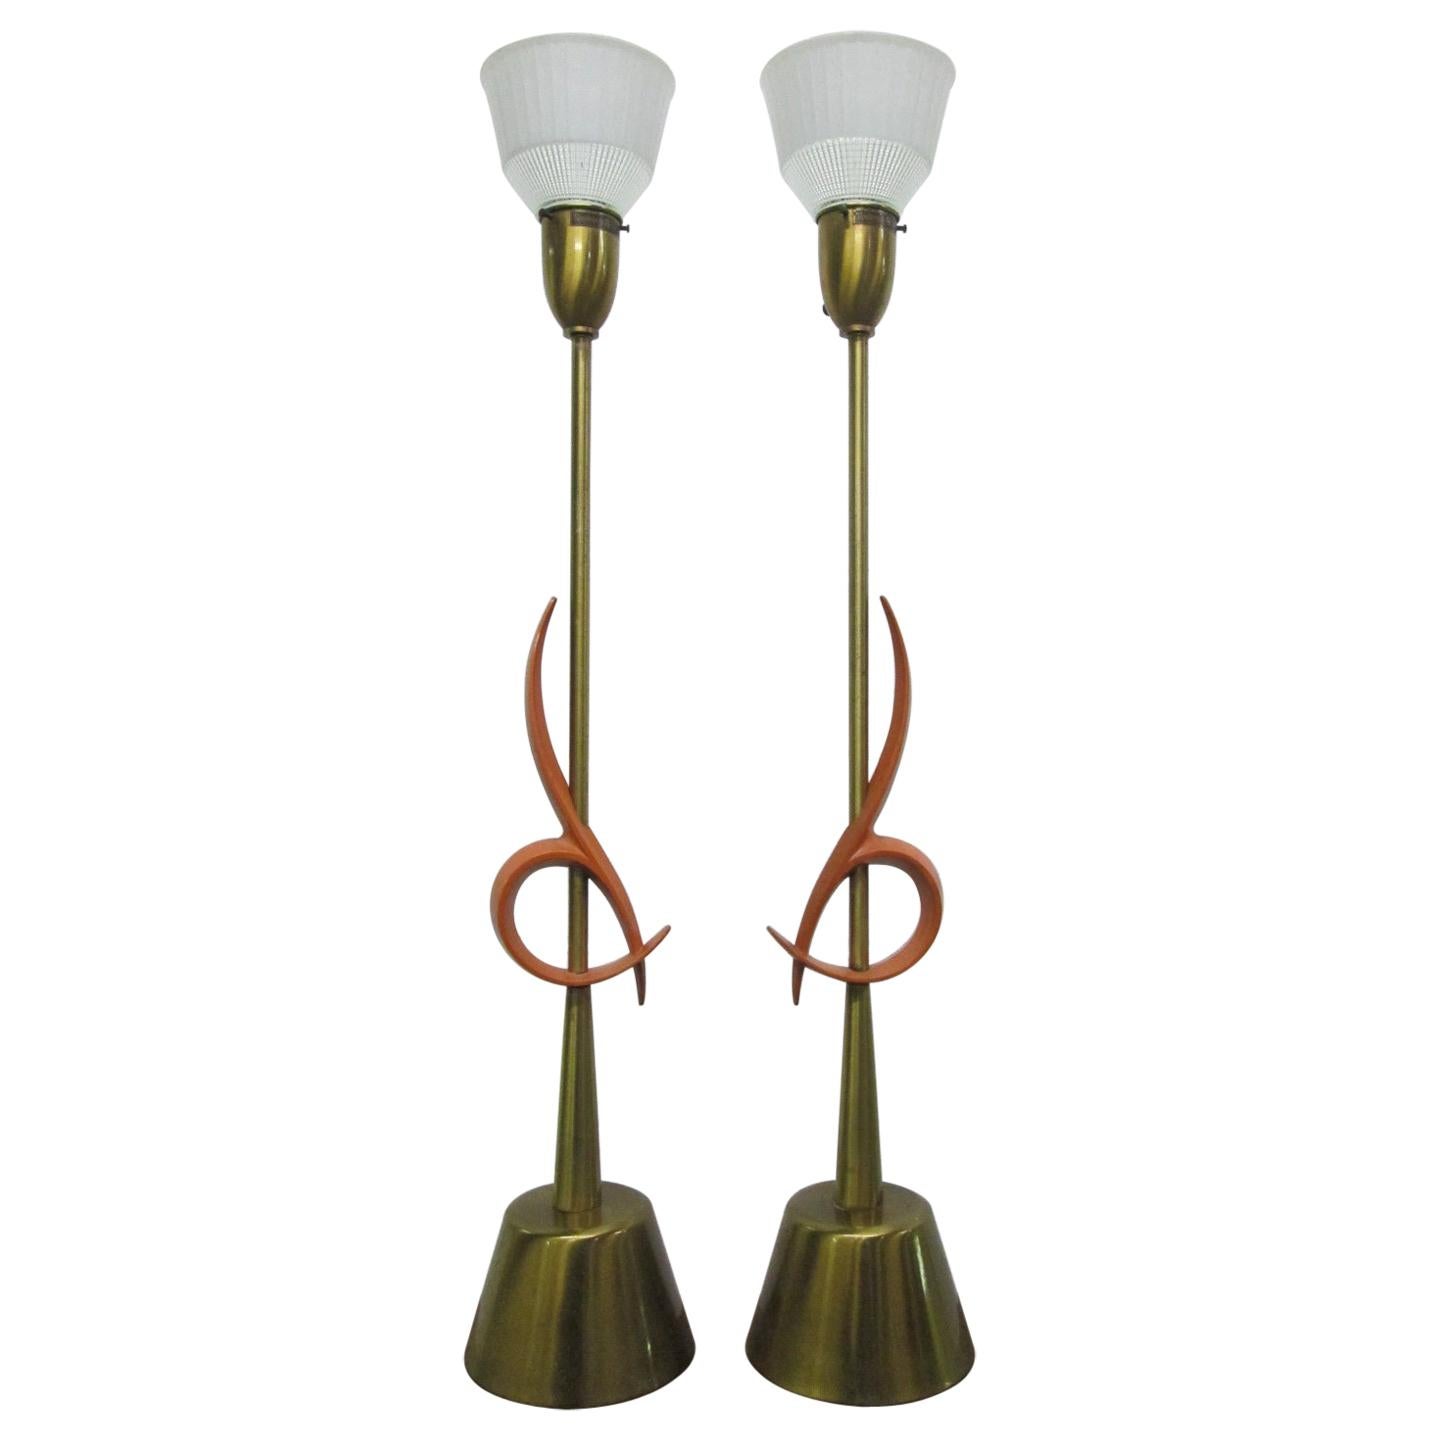 Pair of Large Rembrandt Table Lamps